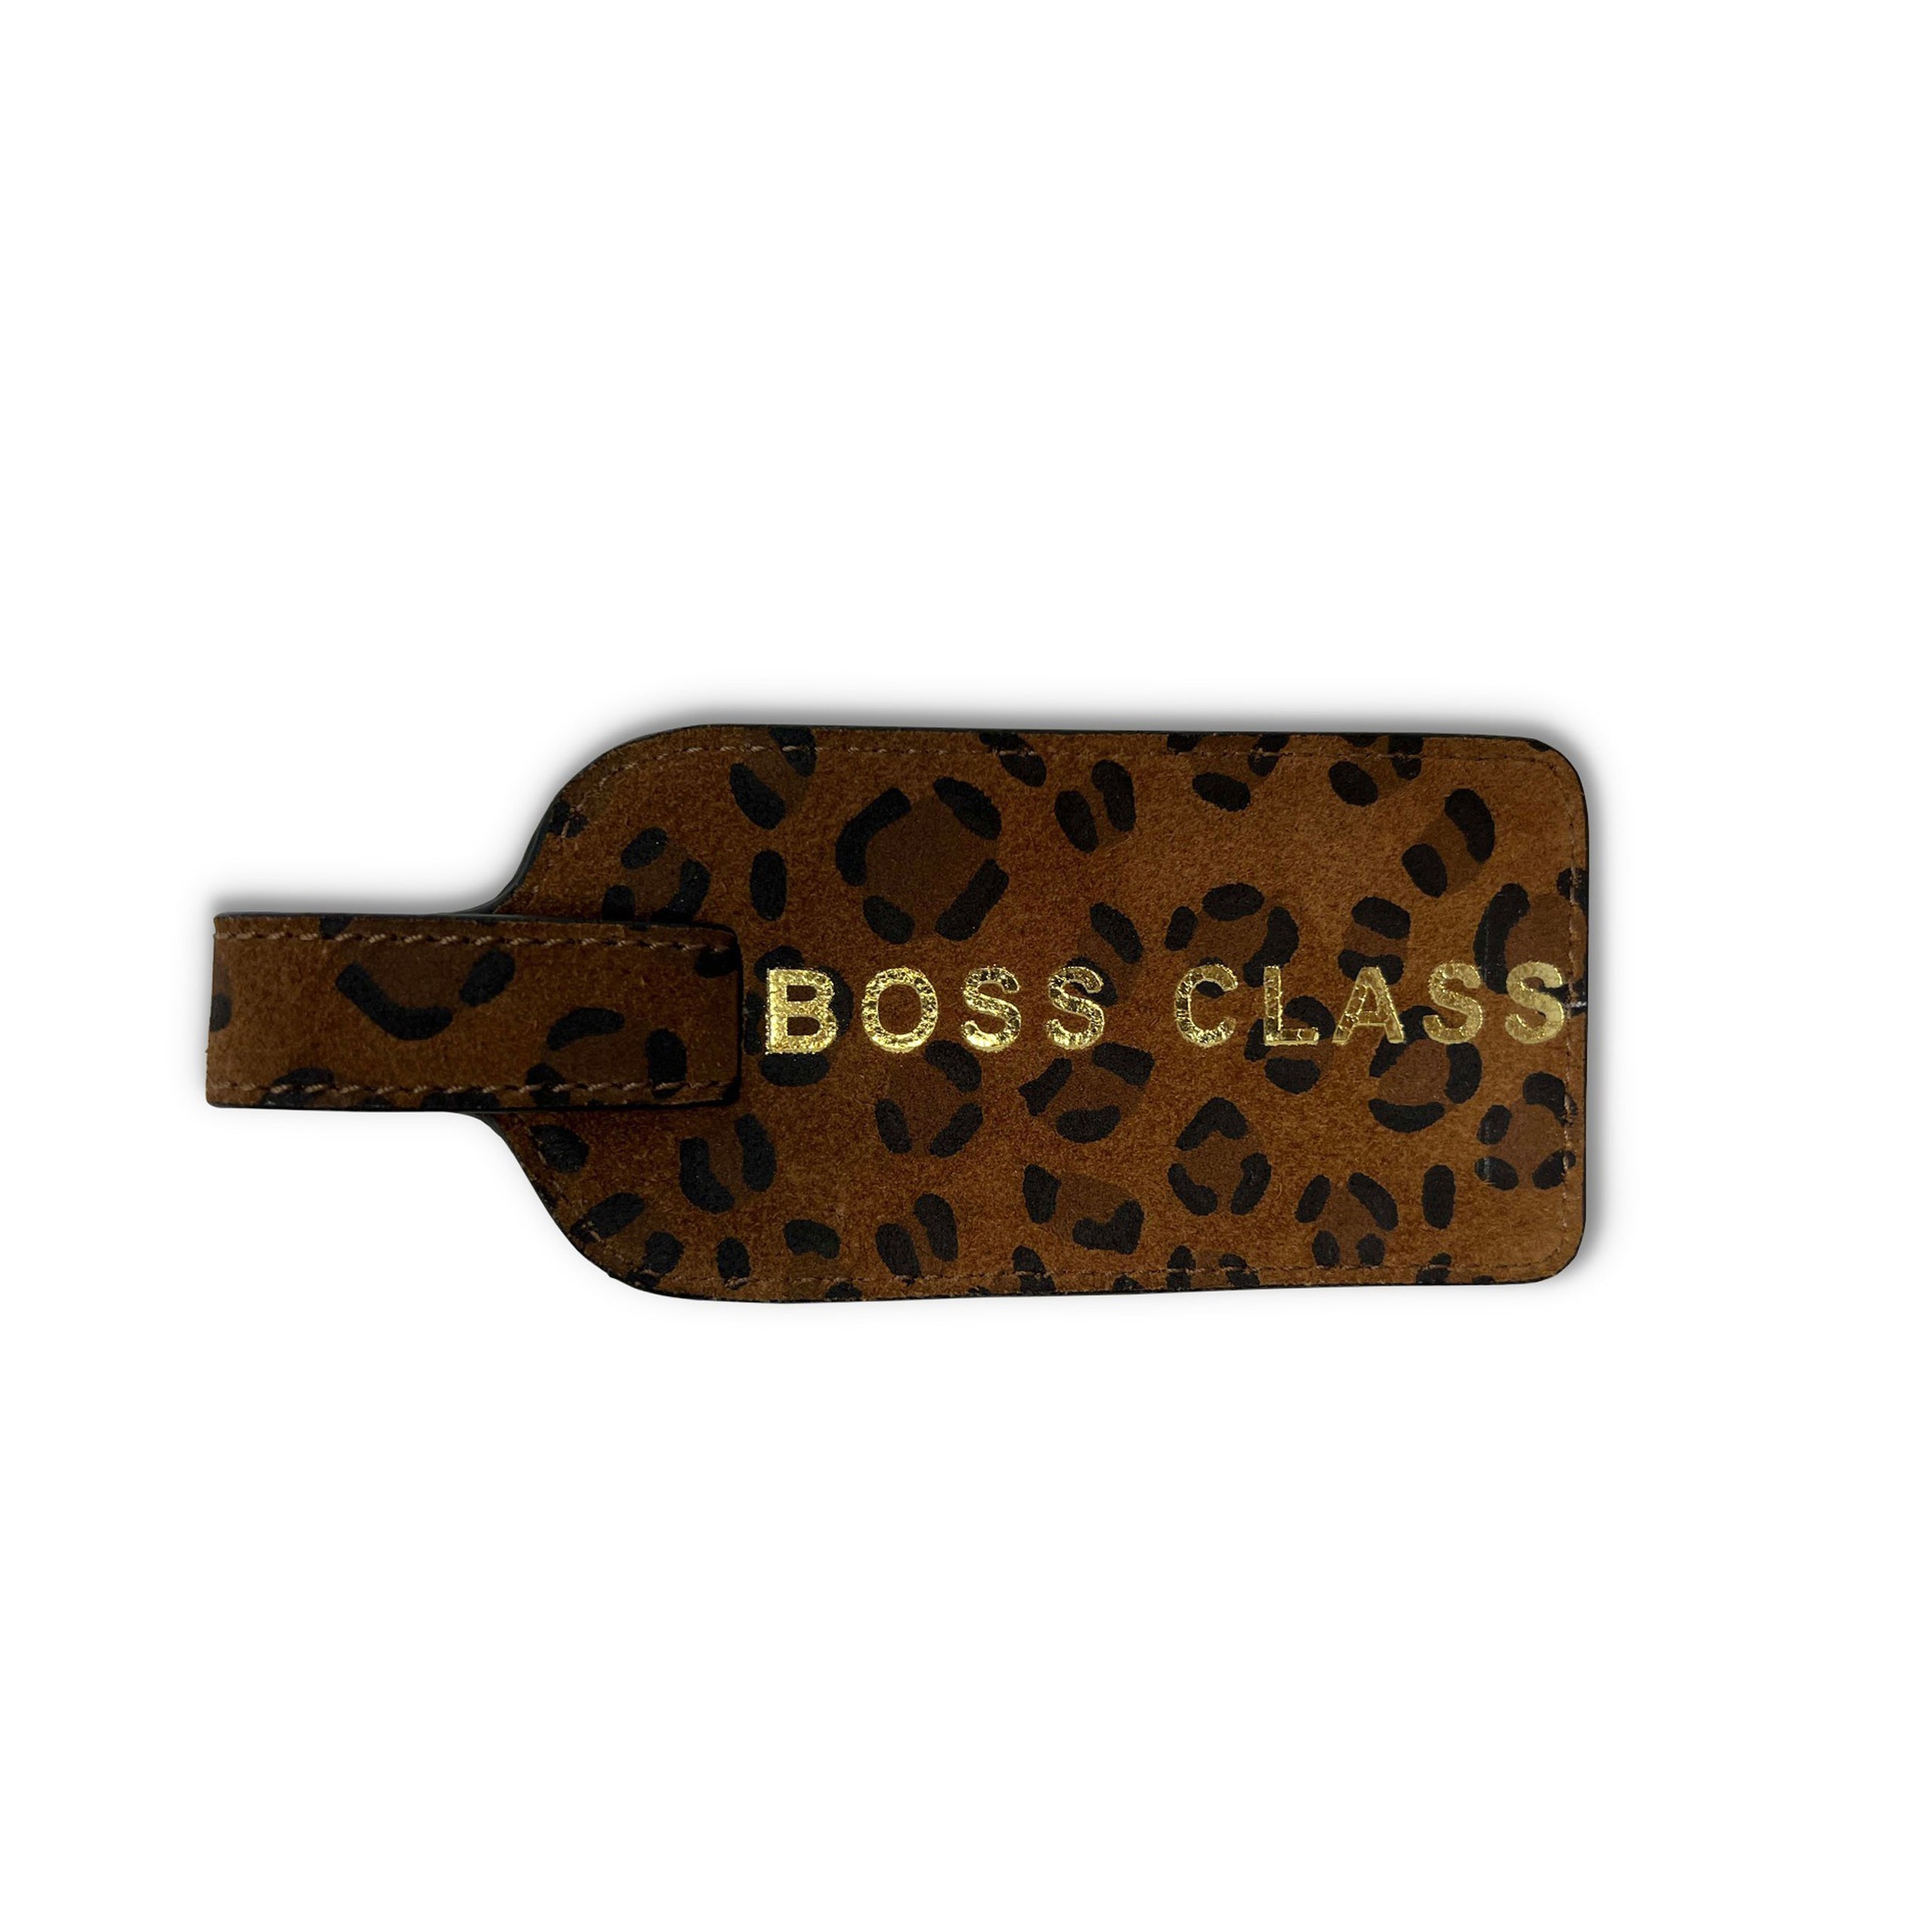 Boss Class Luggage Tag